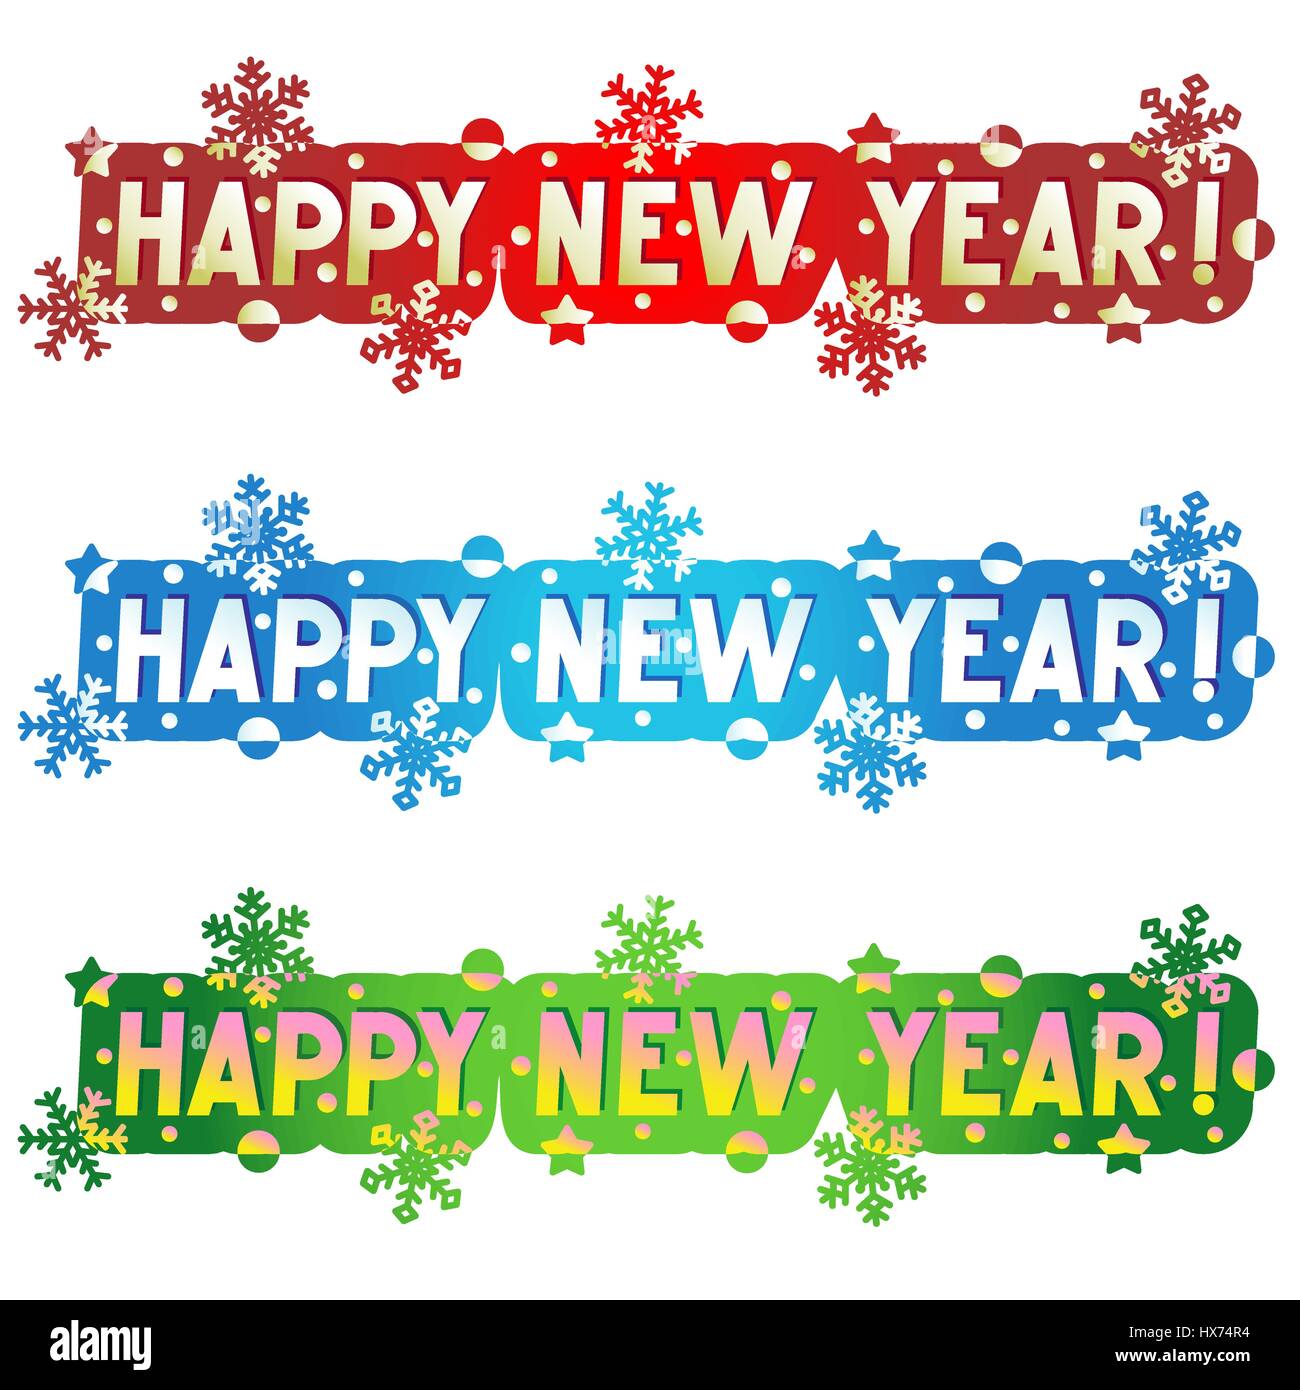 Happy New Year! - three greetings, design elements for cards, banners, invitations, posters, isolated on white background Stock Vector